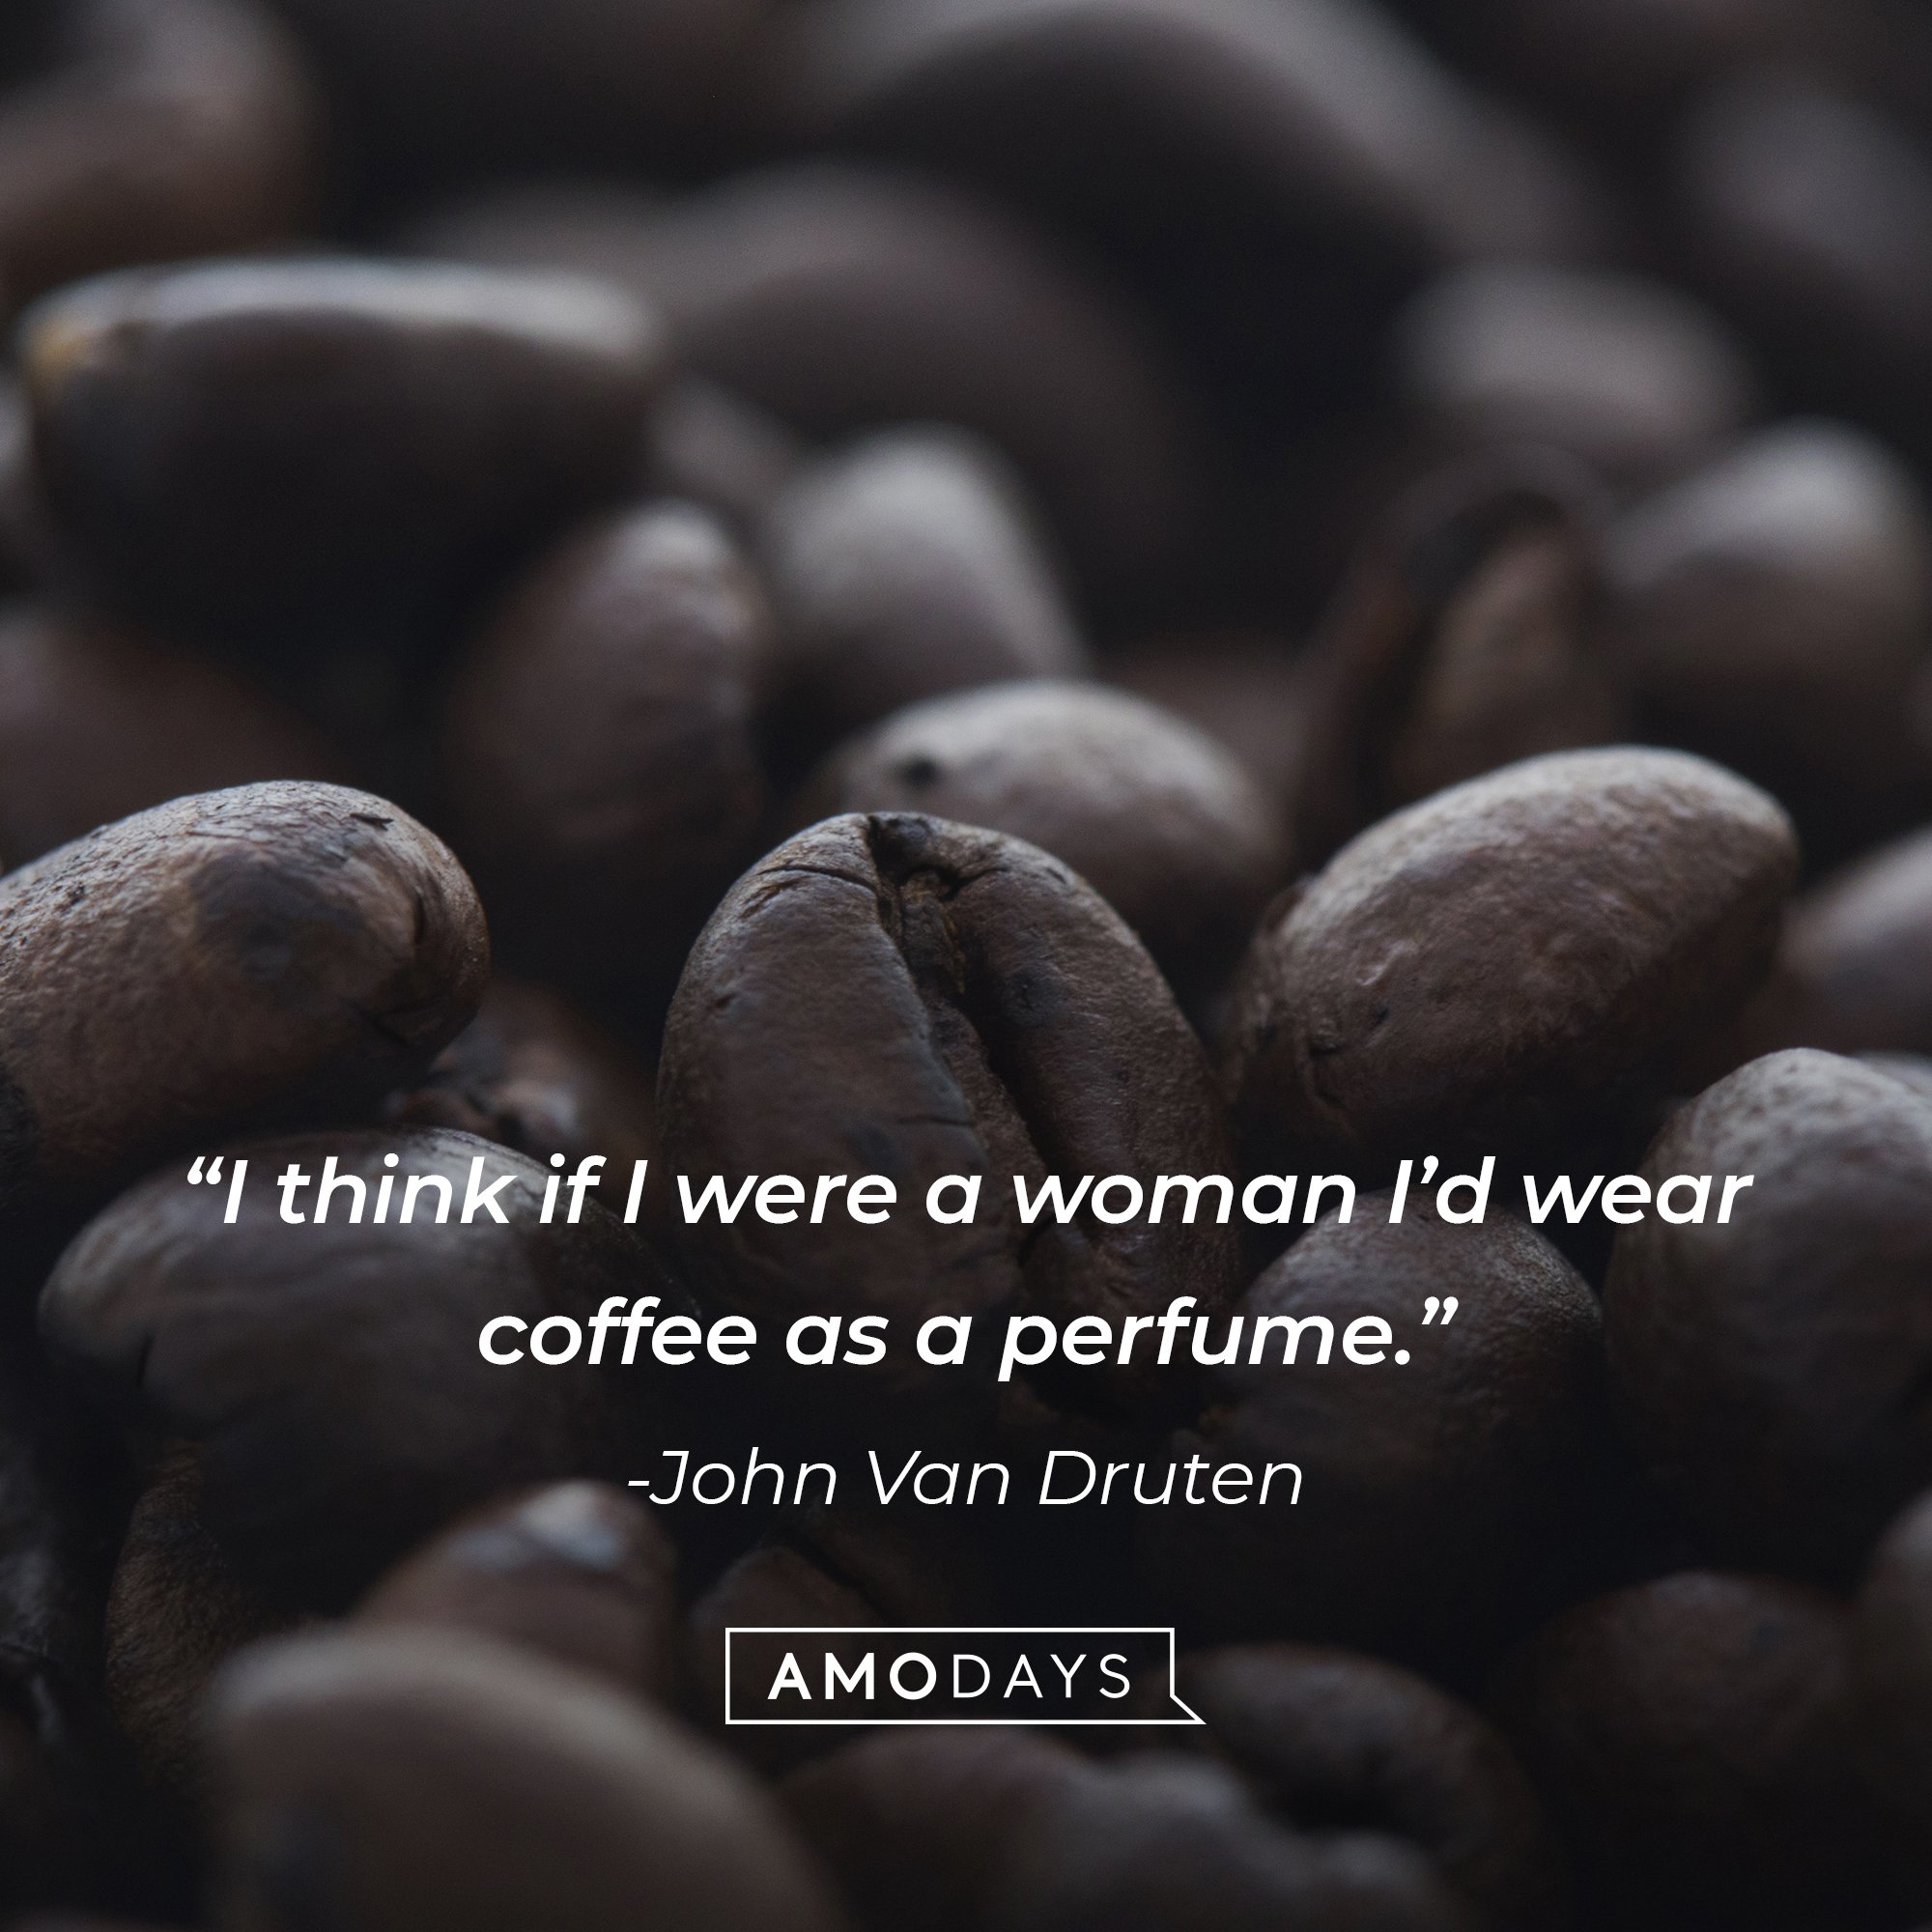 John Van Druten's quote: "I think if I were a woman I'd wear coffee as a perfume." | Image: AmoDays